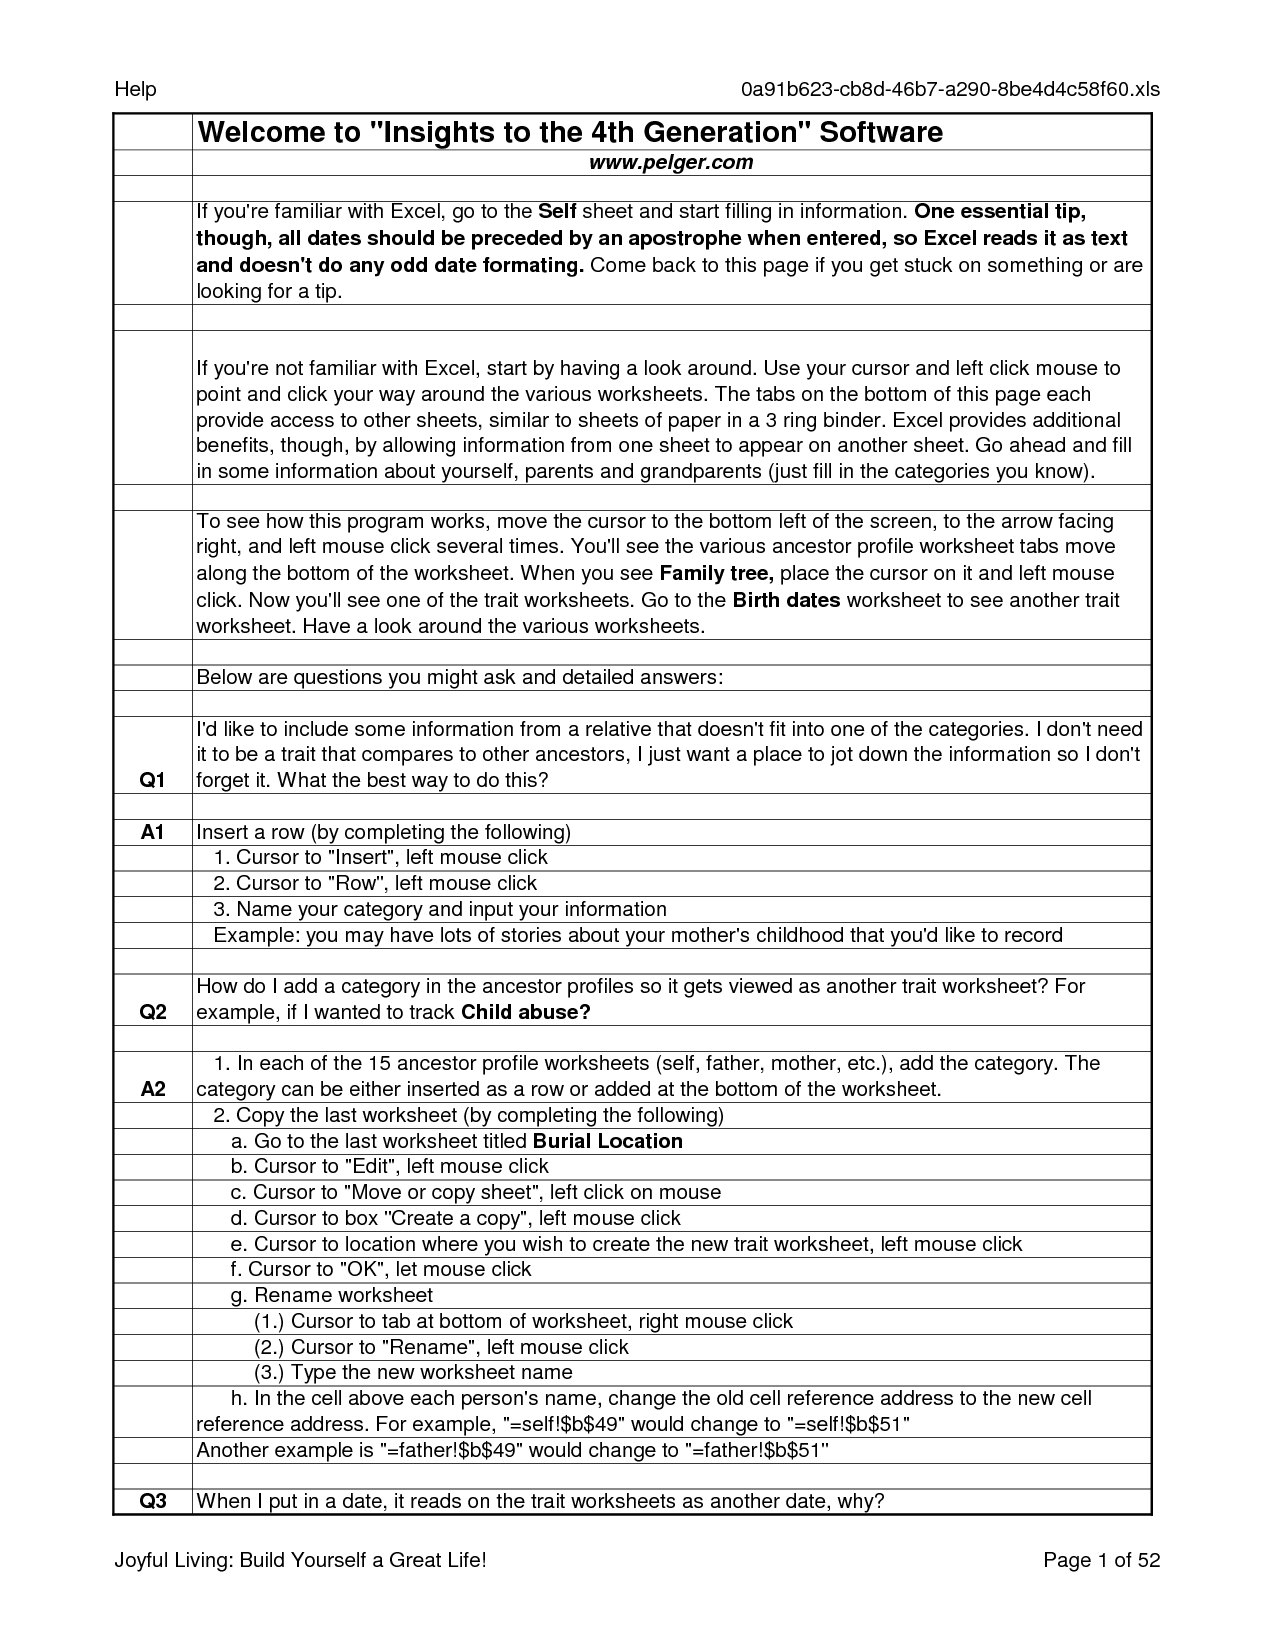 printable-marriage-counseling-worksheets